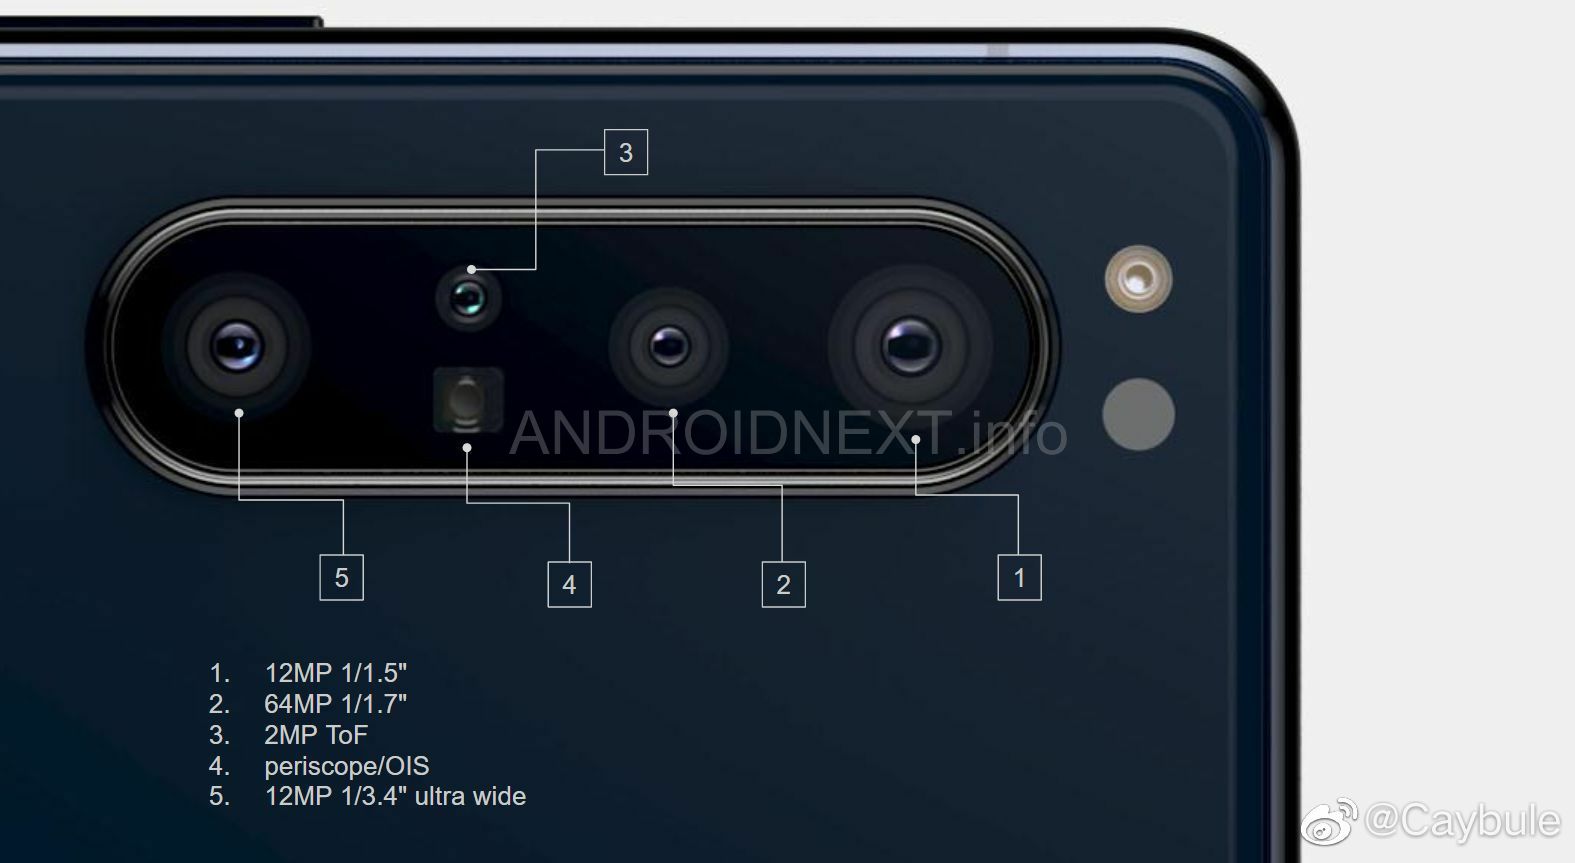 xperia 1.1 "width =" 1575 "height =" 863 "srcset =" https://assets.mspimages.in/wp-content/uploads/2020/01/xperia-1.1.jpg 1575w, https: //assets.mspimages .in / wp-content / uploads / 2020/01 / xperia-1.1-300x164.jpg 300w, https://assets.mspimages.in/wp-content/uploads/2020/01/xperia-1.1-768x421.jpg 768w , https://assets.mspimages.in/wp-content/uploads/2020/01/xperia-1.1-1024x561.jpg 1024w, https://assets.mspimages.in/wp-content/uploads/2020/01/ xperia-1.1-696x381.jpg 696w, https://assets.mspimages.in/wp-content/uploads/2020/01/xperia-1.1-1068x585.jpg 1068w, https://assets.mspimages.in/wp- content / uploads / 2020/01 / xperia-1.1-767x420.jpg 767w, https://assets.mspimages.in/wp-content/uploads/2020/01/xperia-1.1-50x27.jpg 50w "ukuran =" ( lebar maks: 1575px) 100vw, 1575px